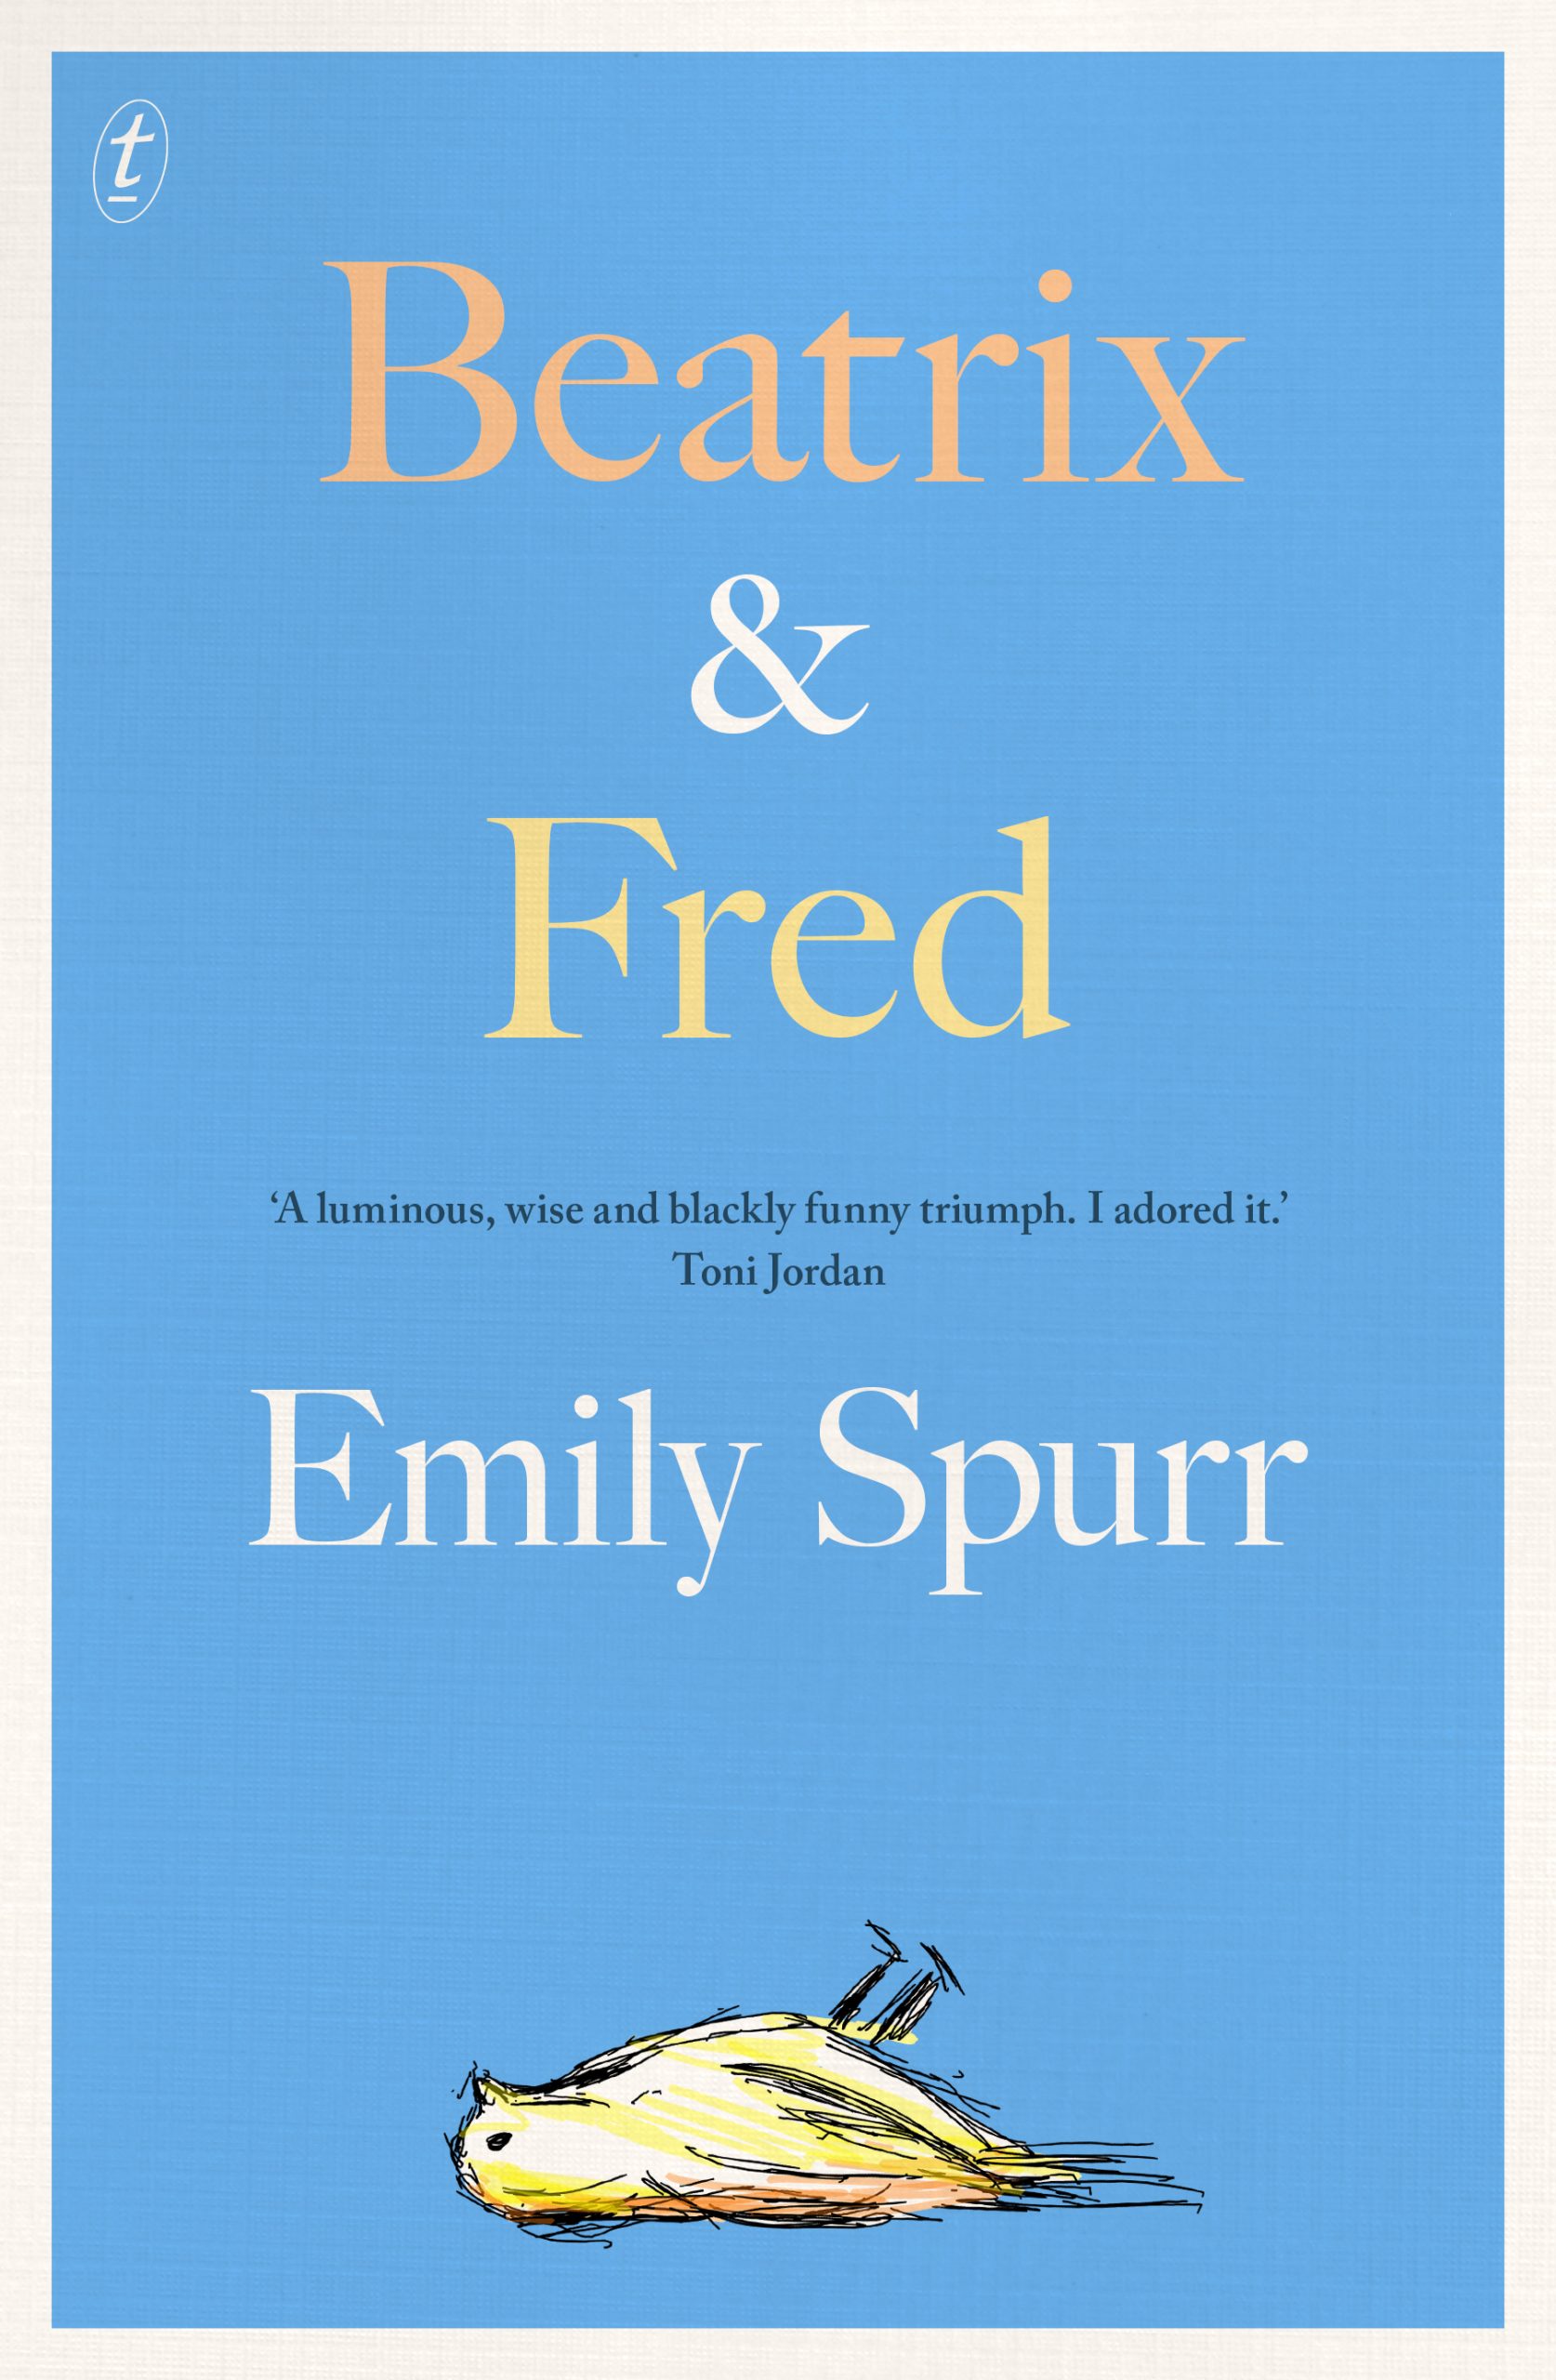 Beatrix & Fred: Emily Spurr in conversation with Jane Rawson - Fullers Bookshop